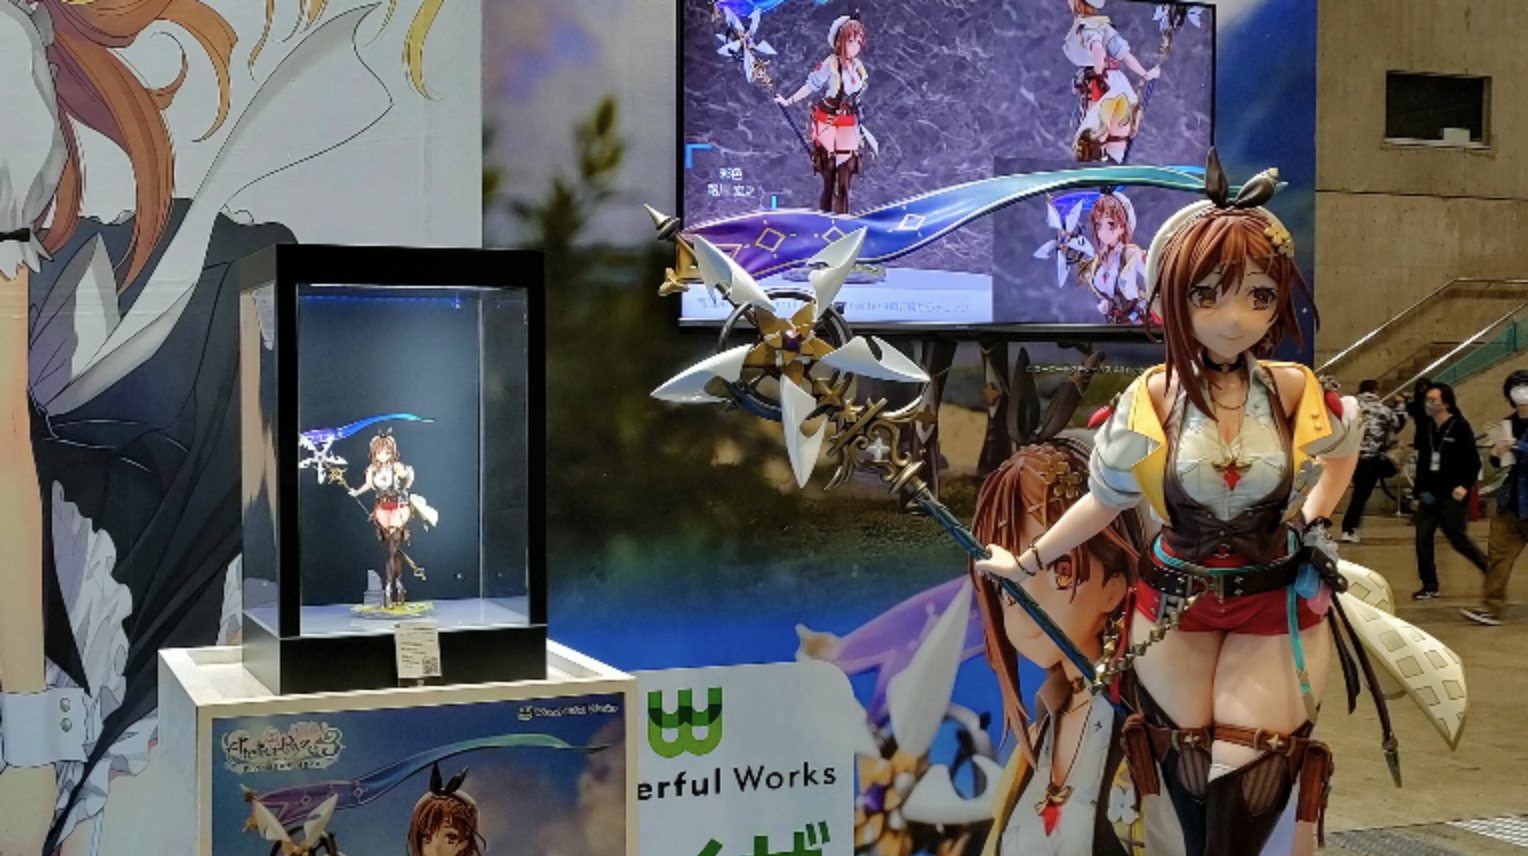 At WonHobby 36, a life-size statue of Ryza in her Atelier Ryza 3 outfit based on a 1/7th scale figure appeared.